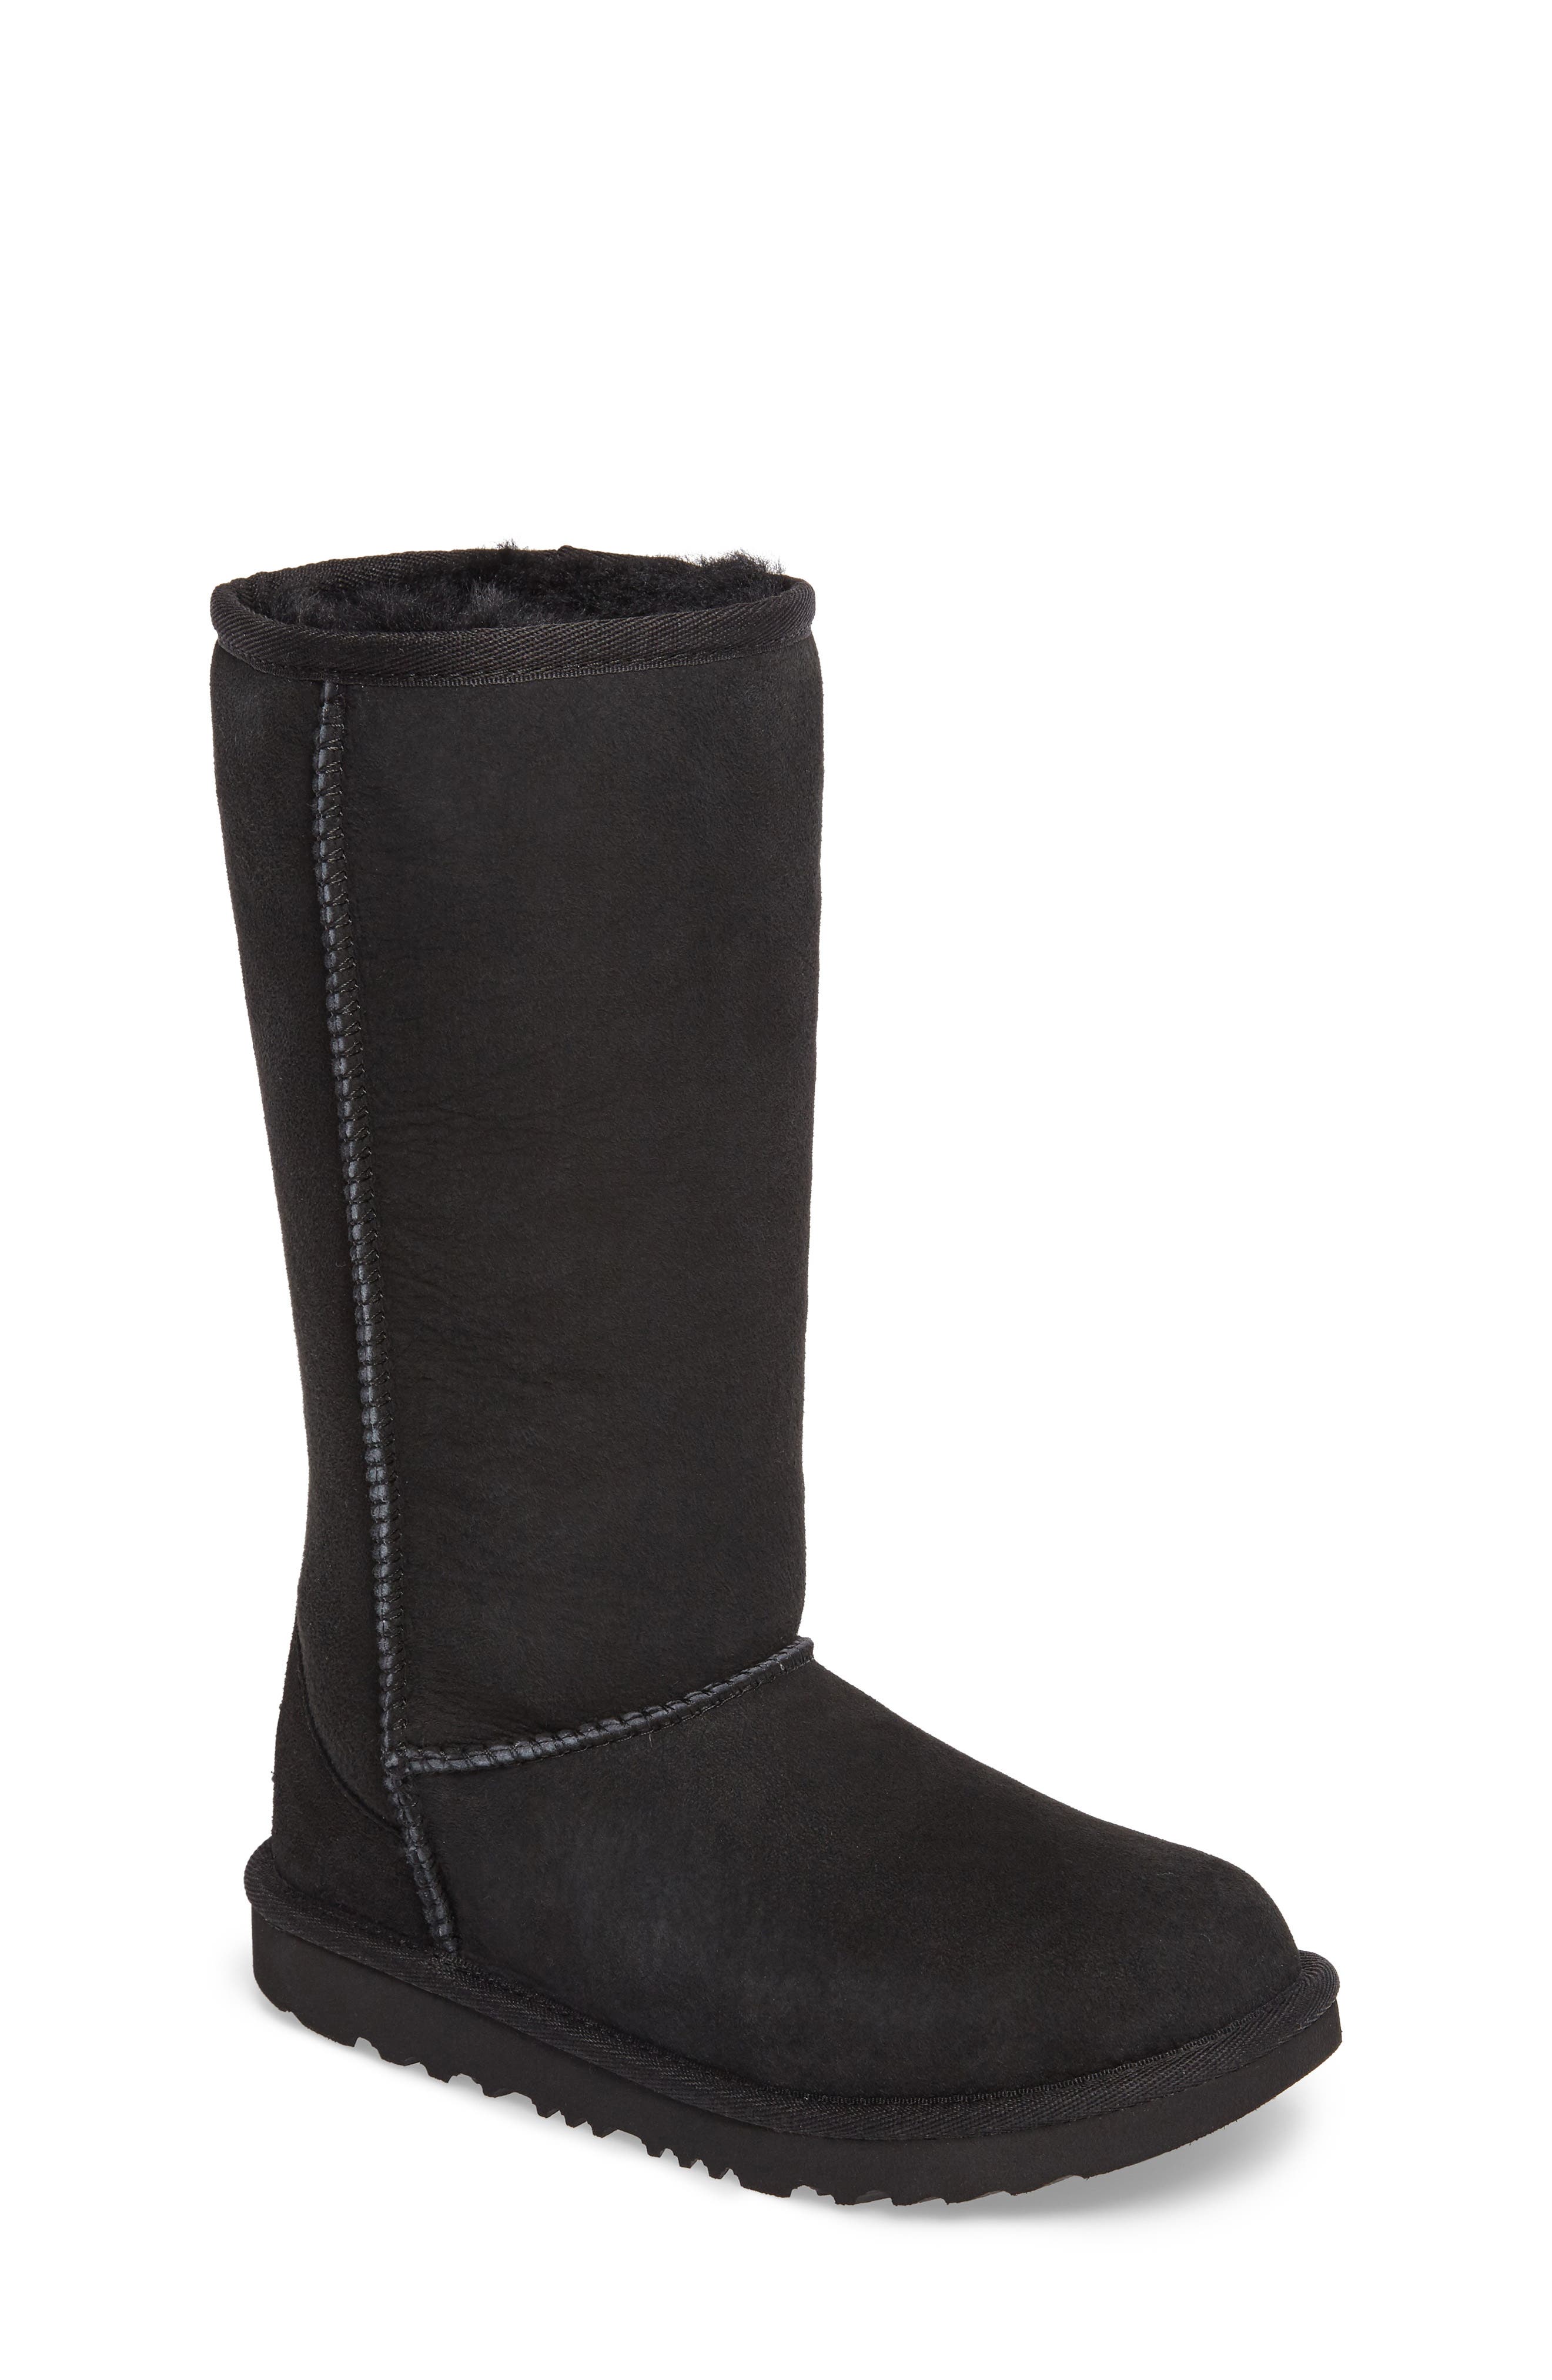 classic tall kids ugg boots on sale